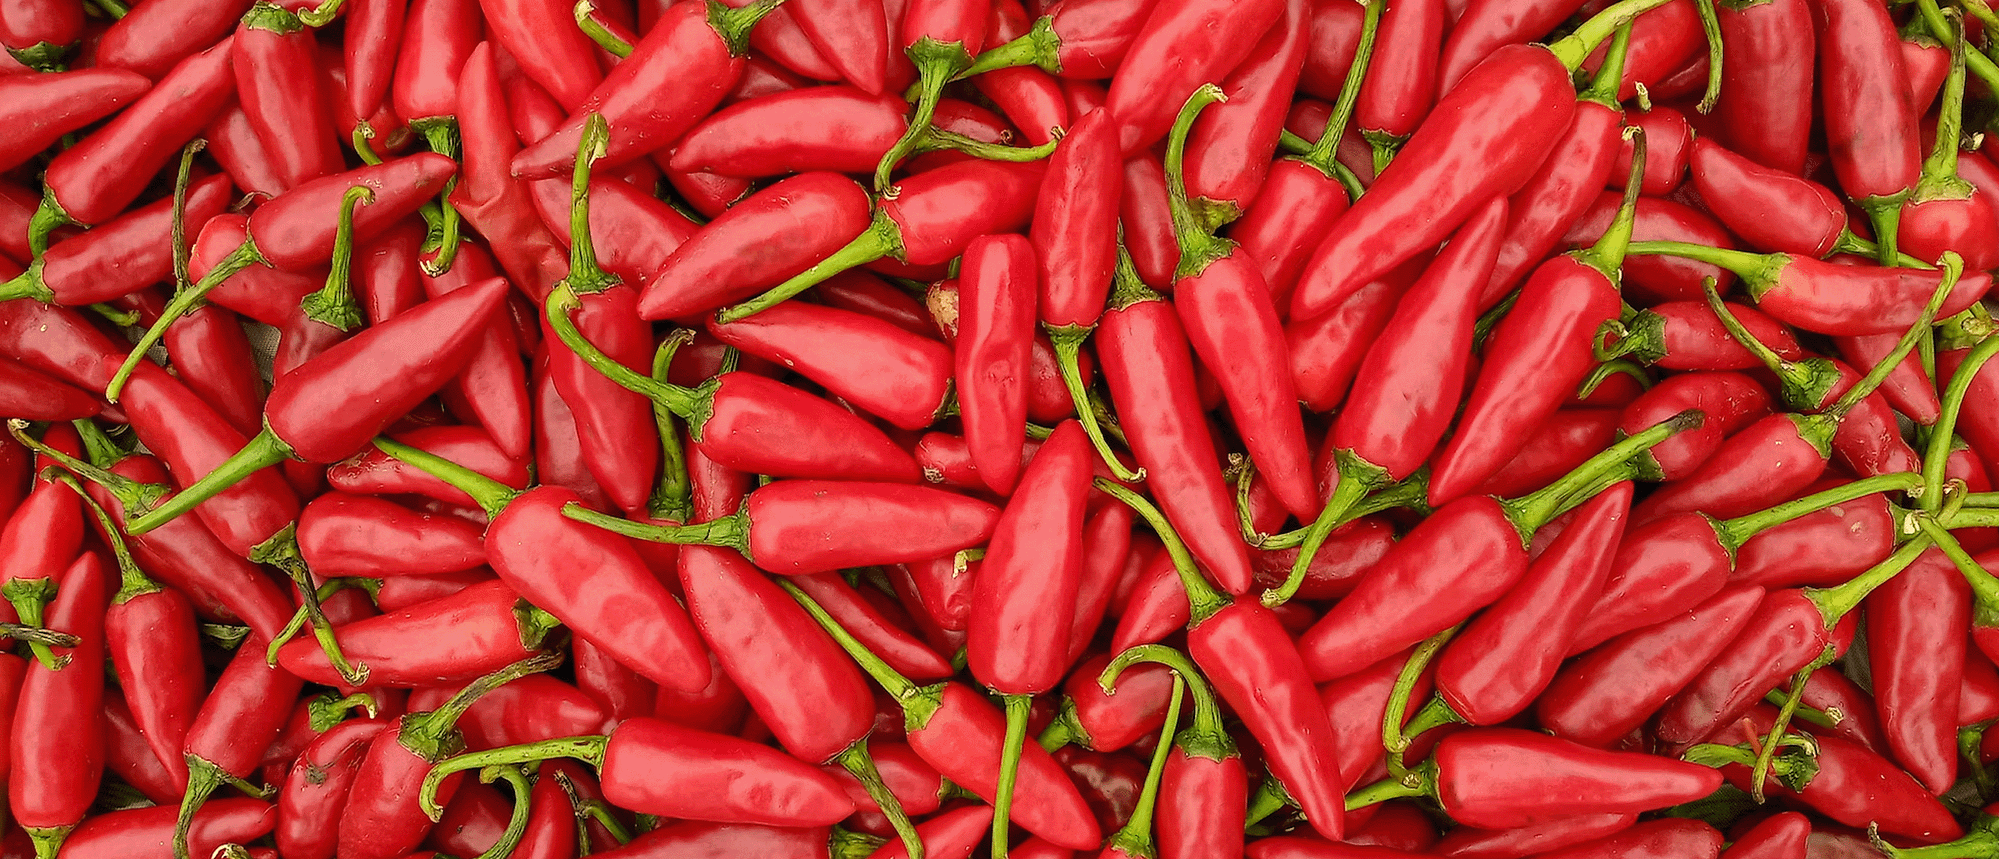 Lots of red chilli peppers piled on top of each other.